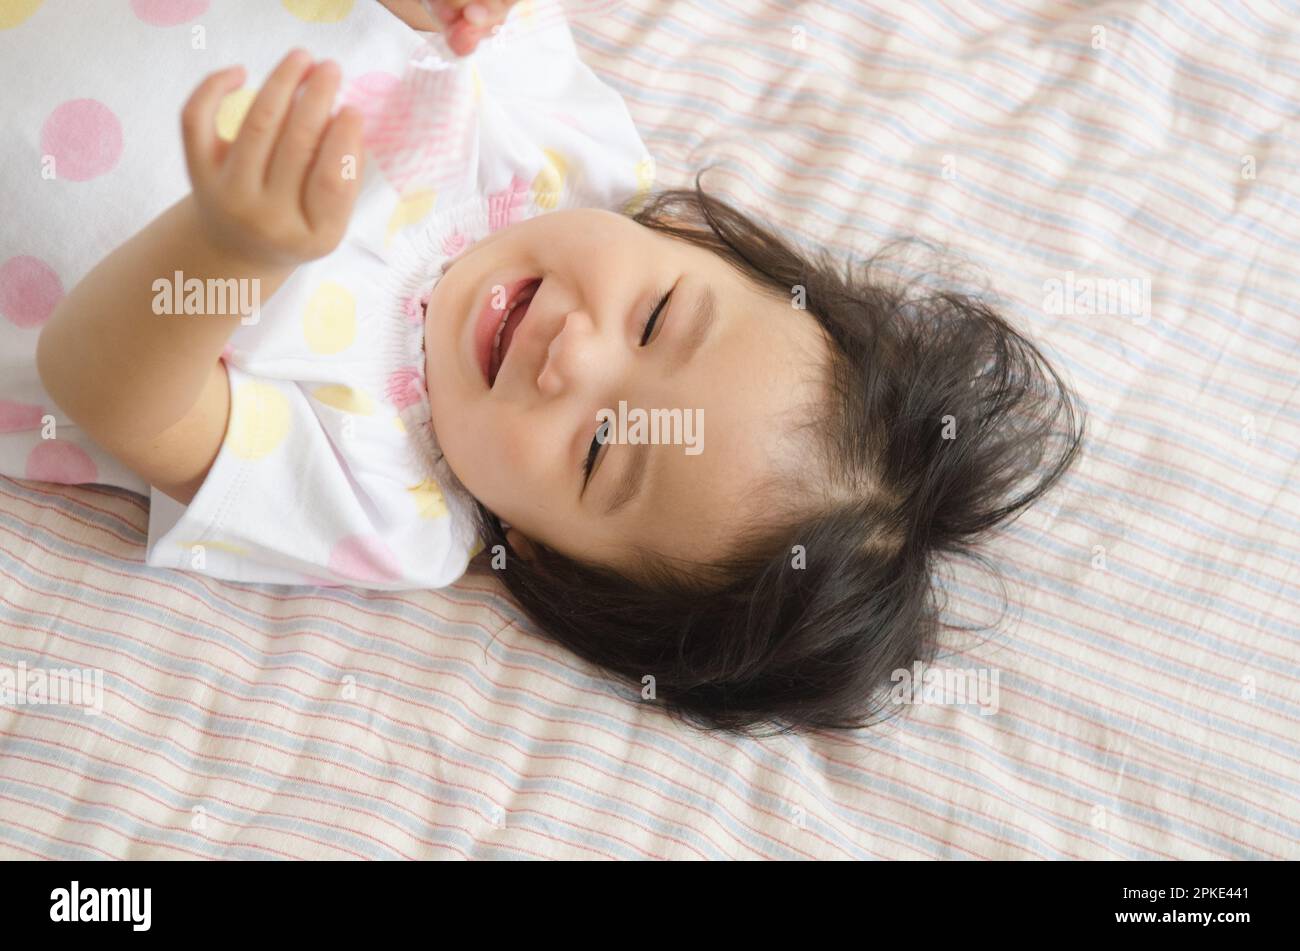 Girl laughing on bed Stock Photo